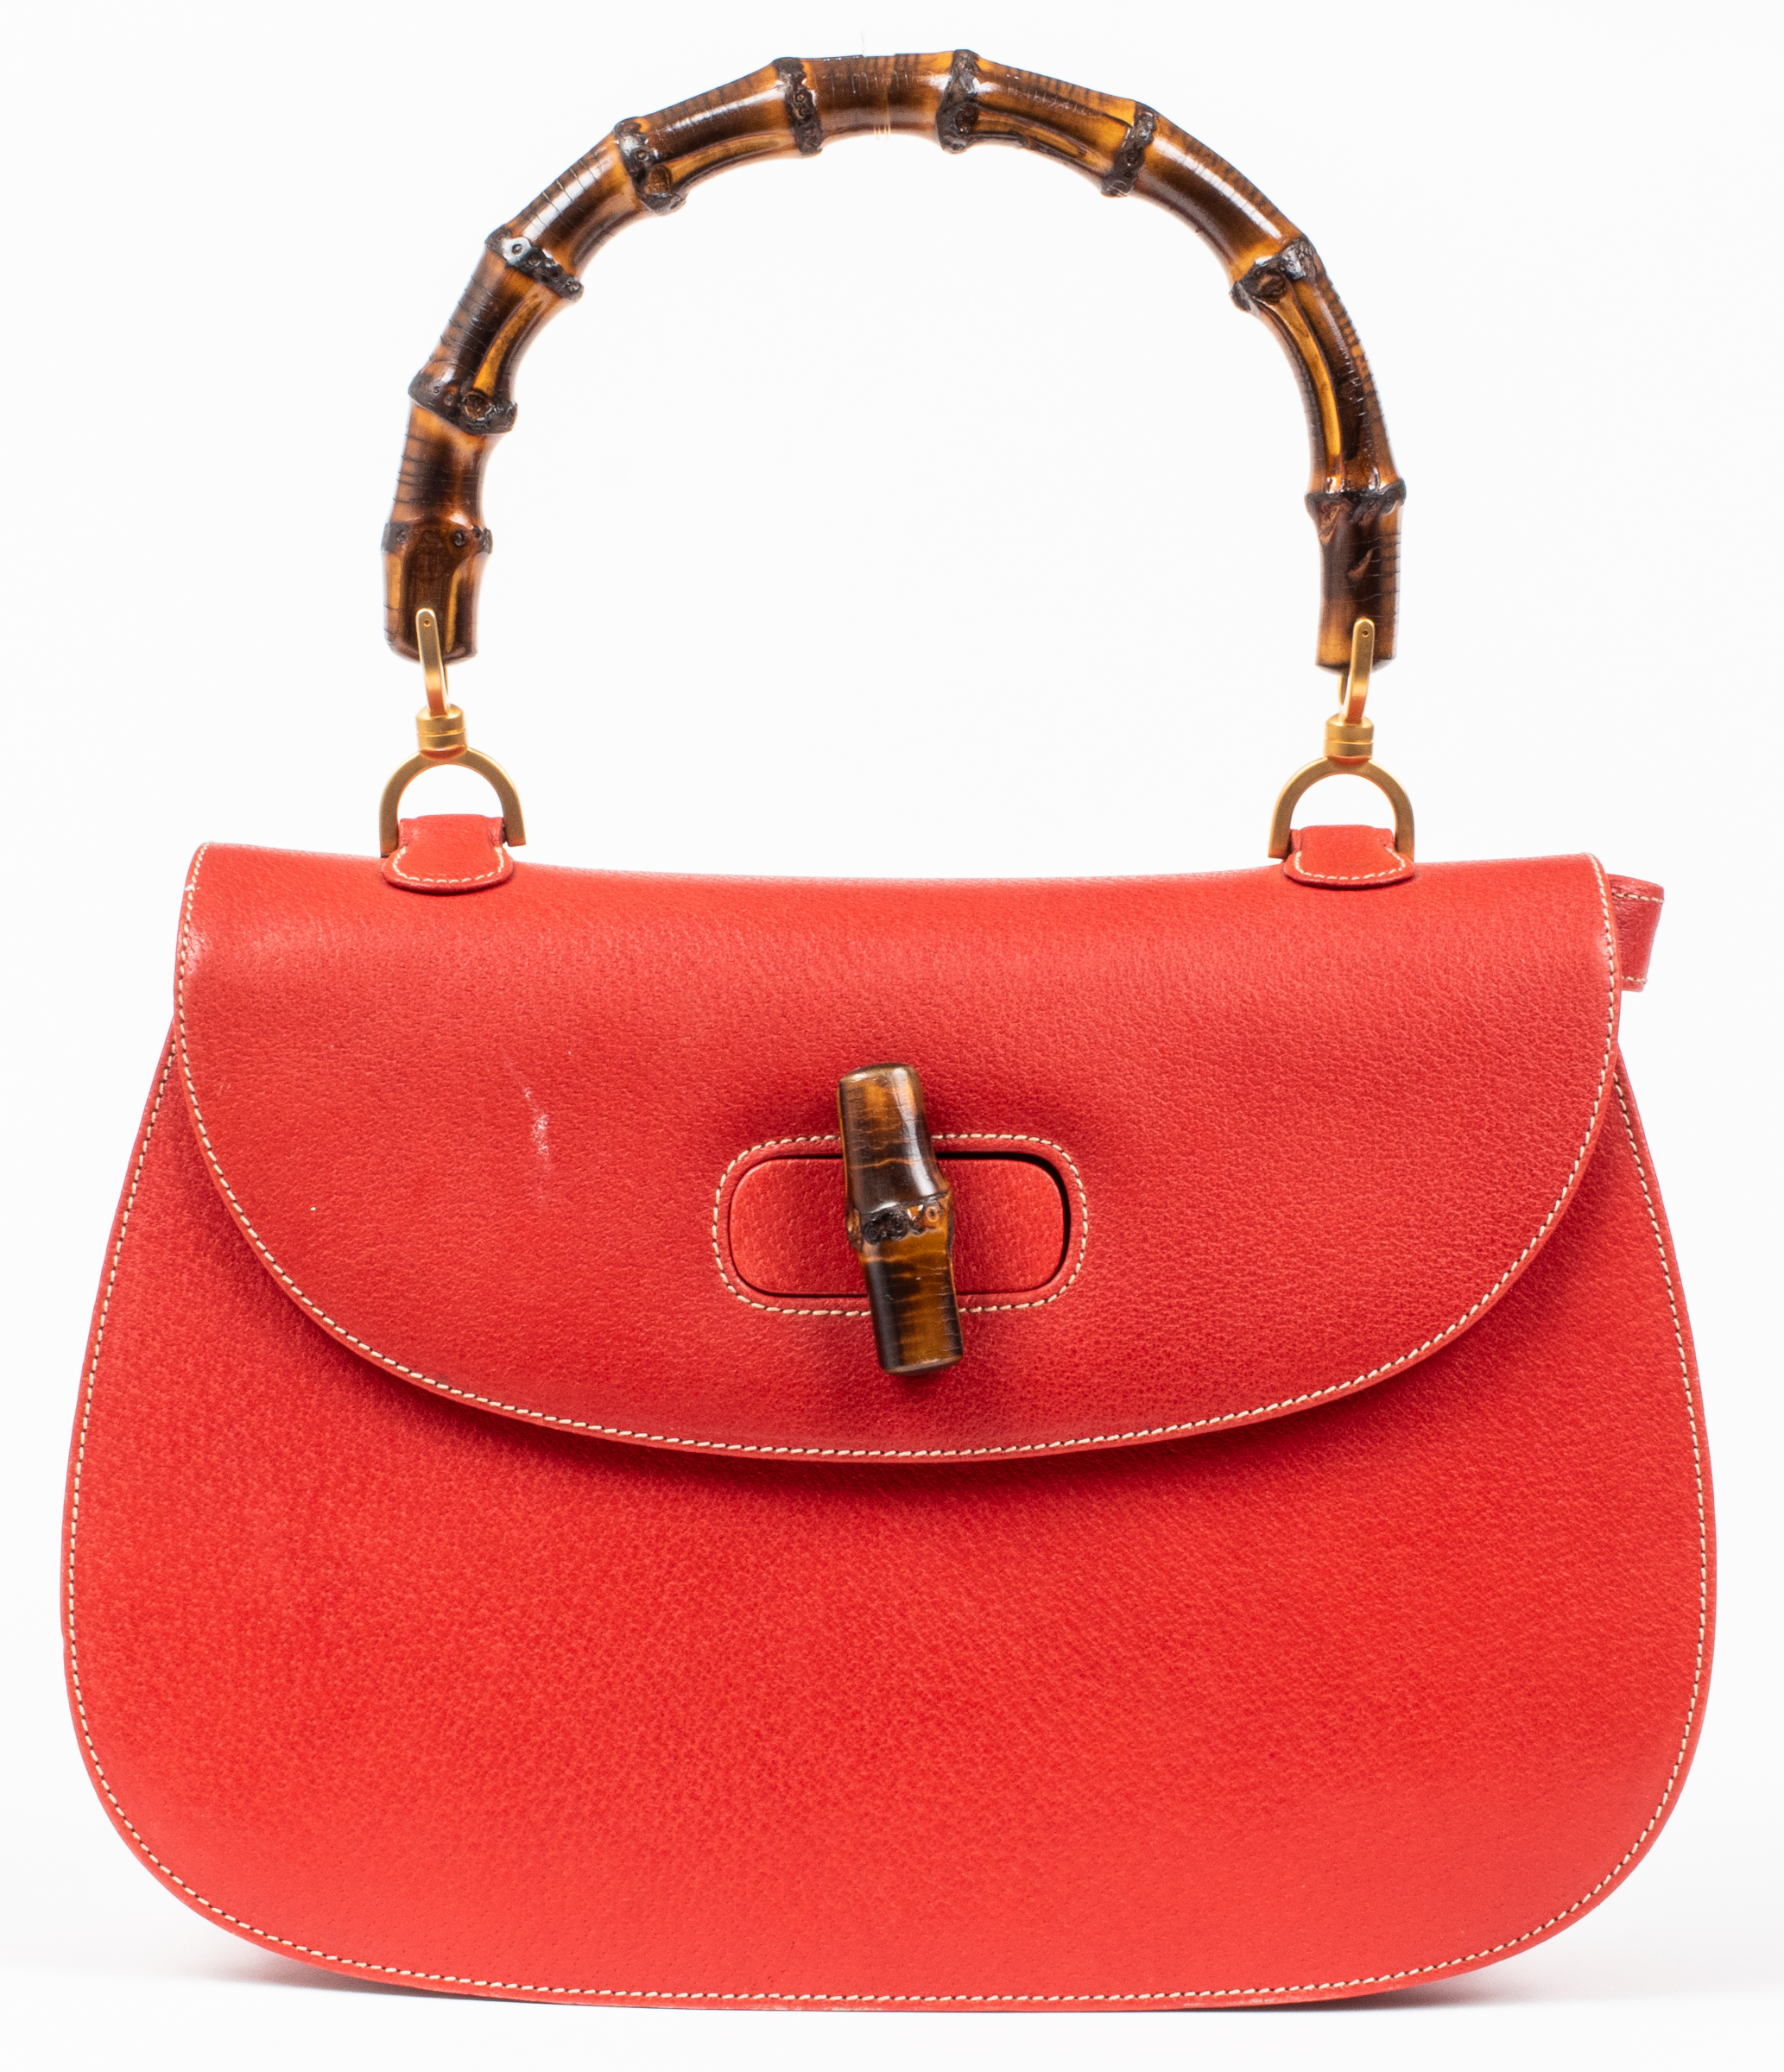 GUCCI RED LEATHER BAMBOO HANDLE